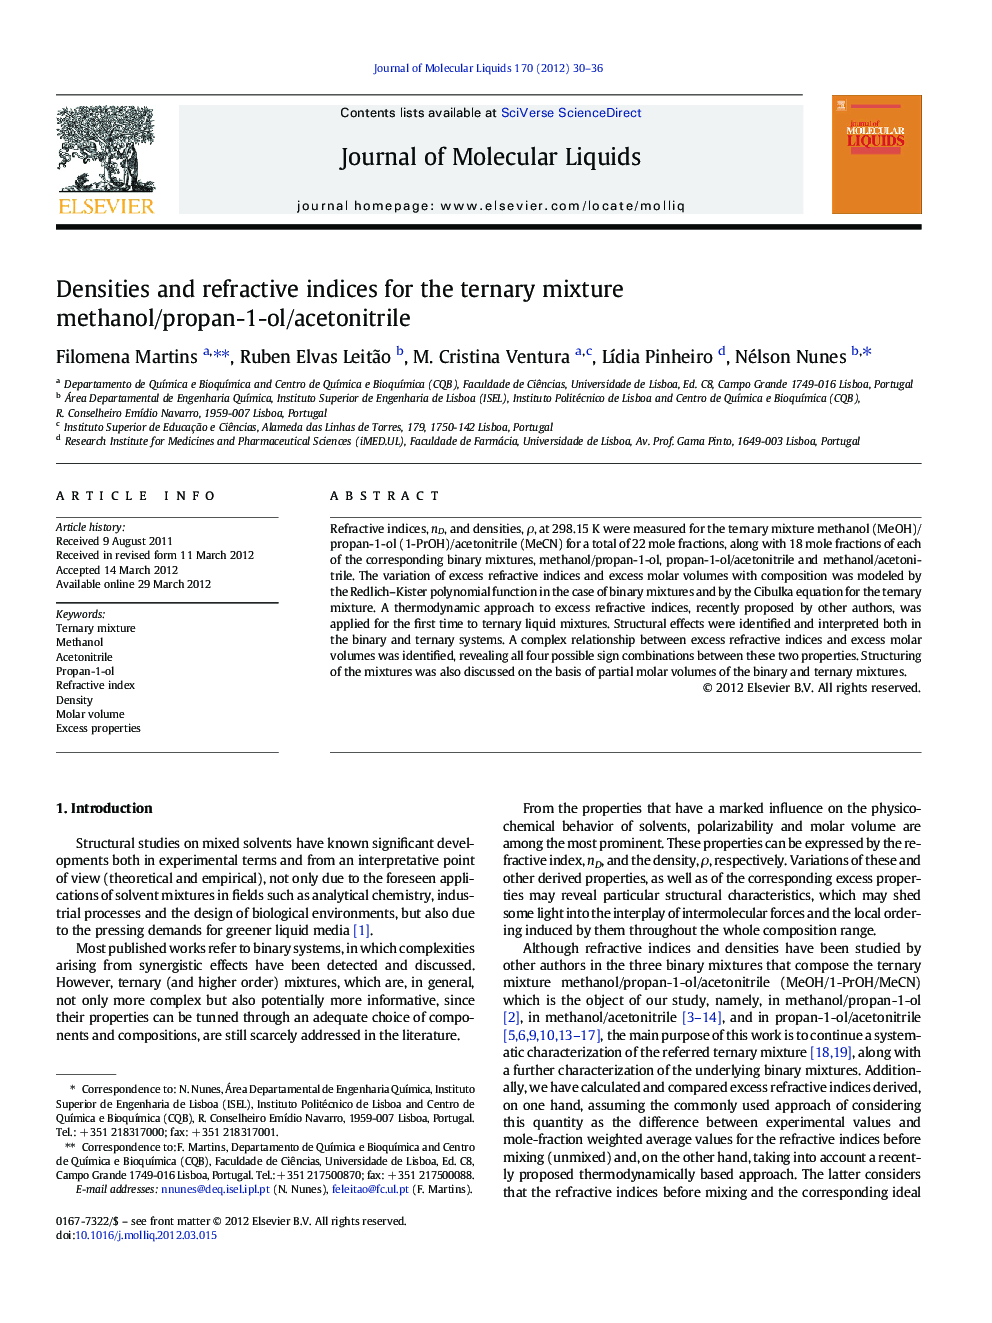 Densities and refractive indices for the ternary mixture methanol/propan-1-ol/acetonitrile